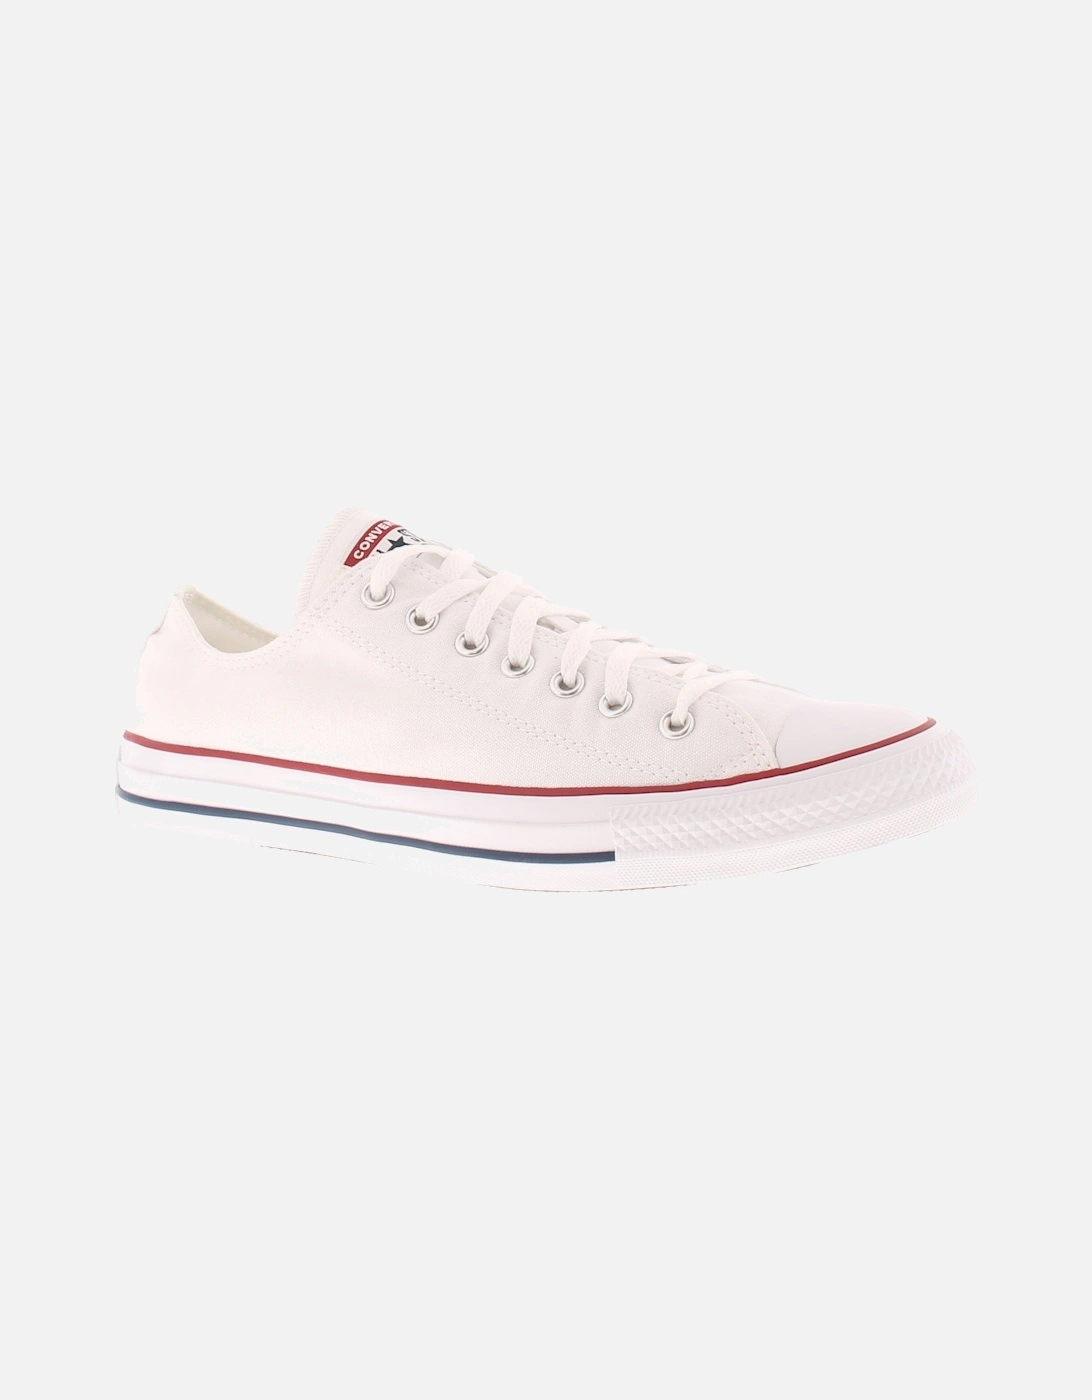 Converse Womens Canvas Pumps Plimsolls All Star Canvas ox Lace Up white UK Size, 6 of 5